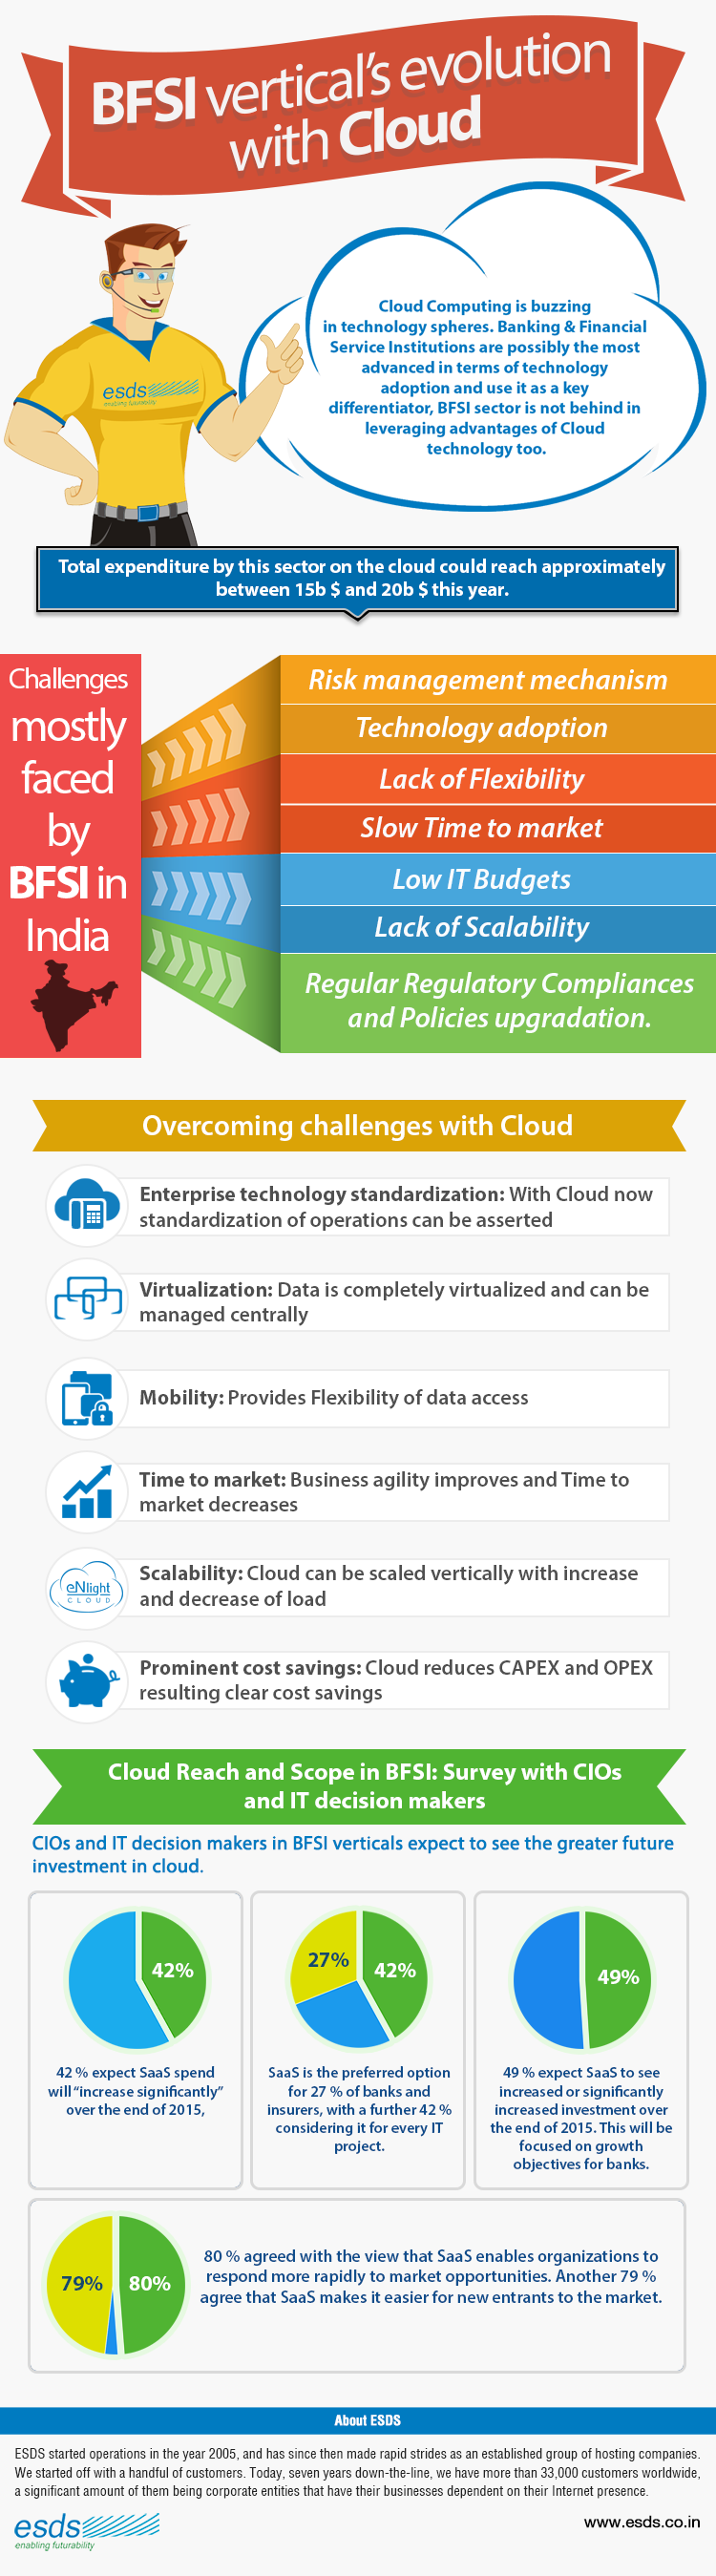 BFSI vertical’s evolution with Cloud